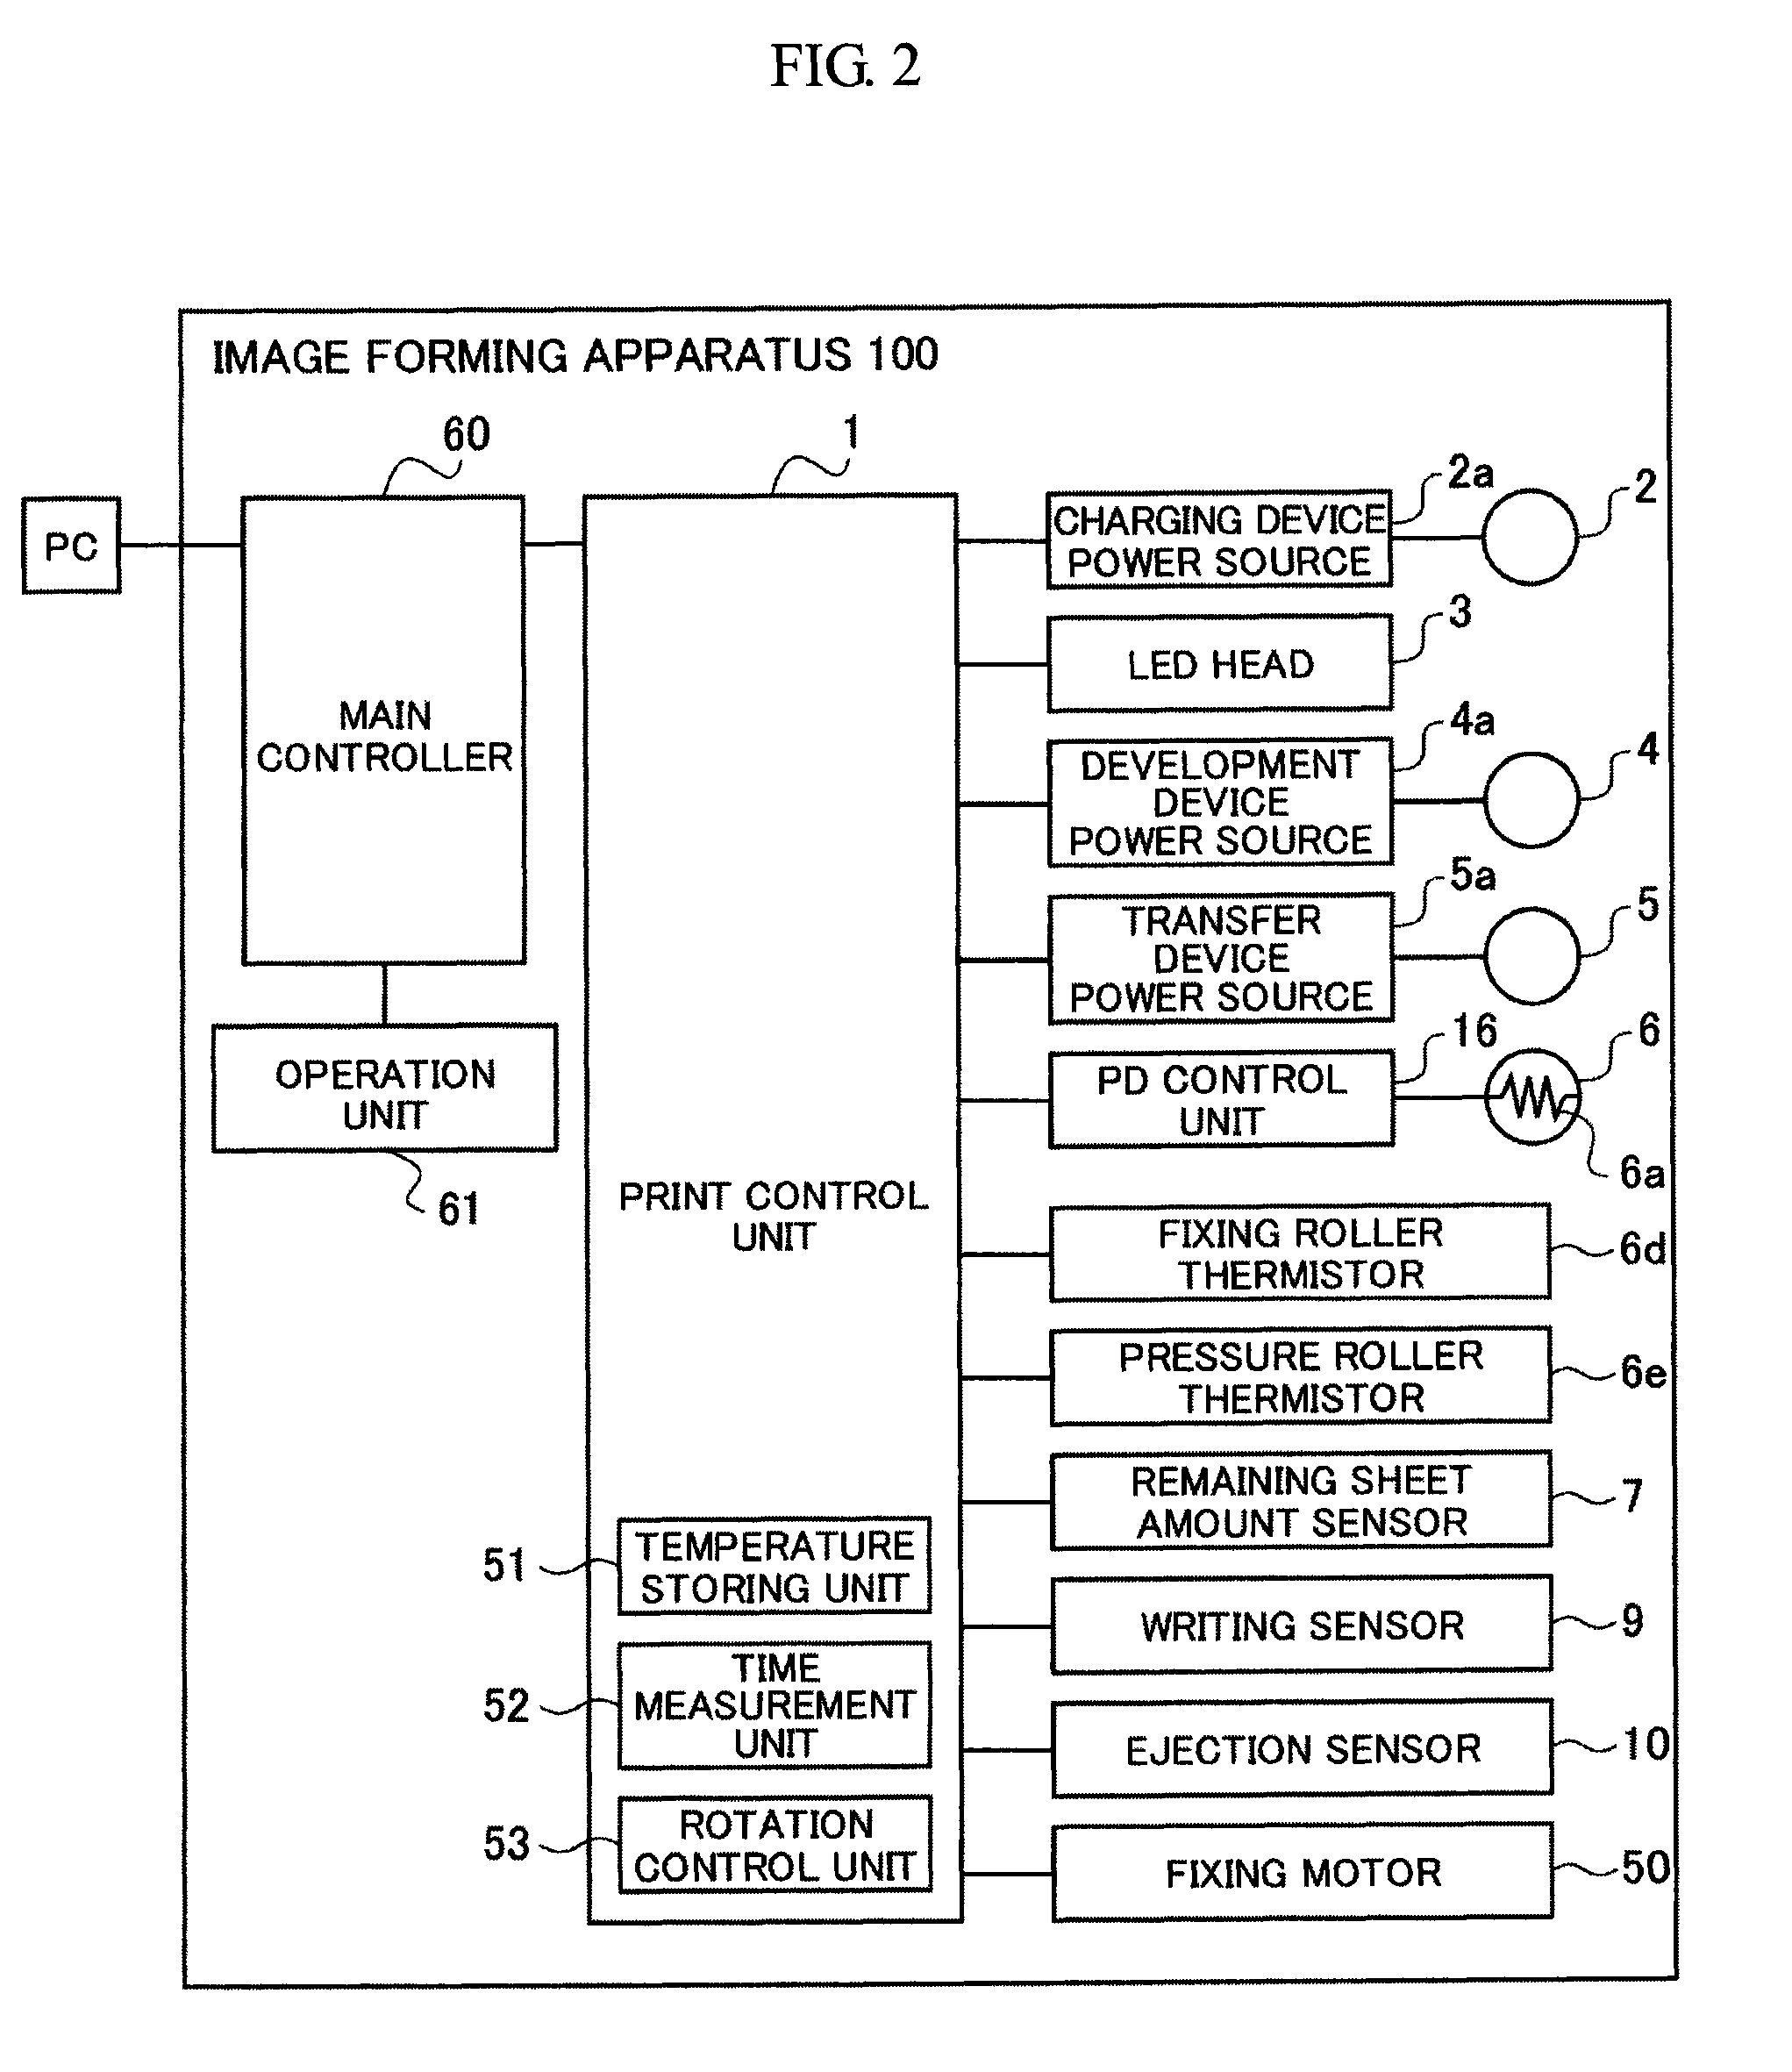 Image forming apparatus that uses fixing member temperature or thickness of recording medium to detect when to halt the rotation drive of a fixing member drive unit